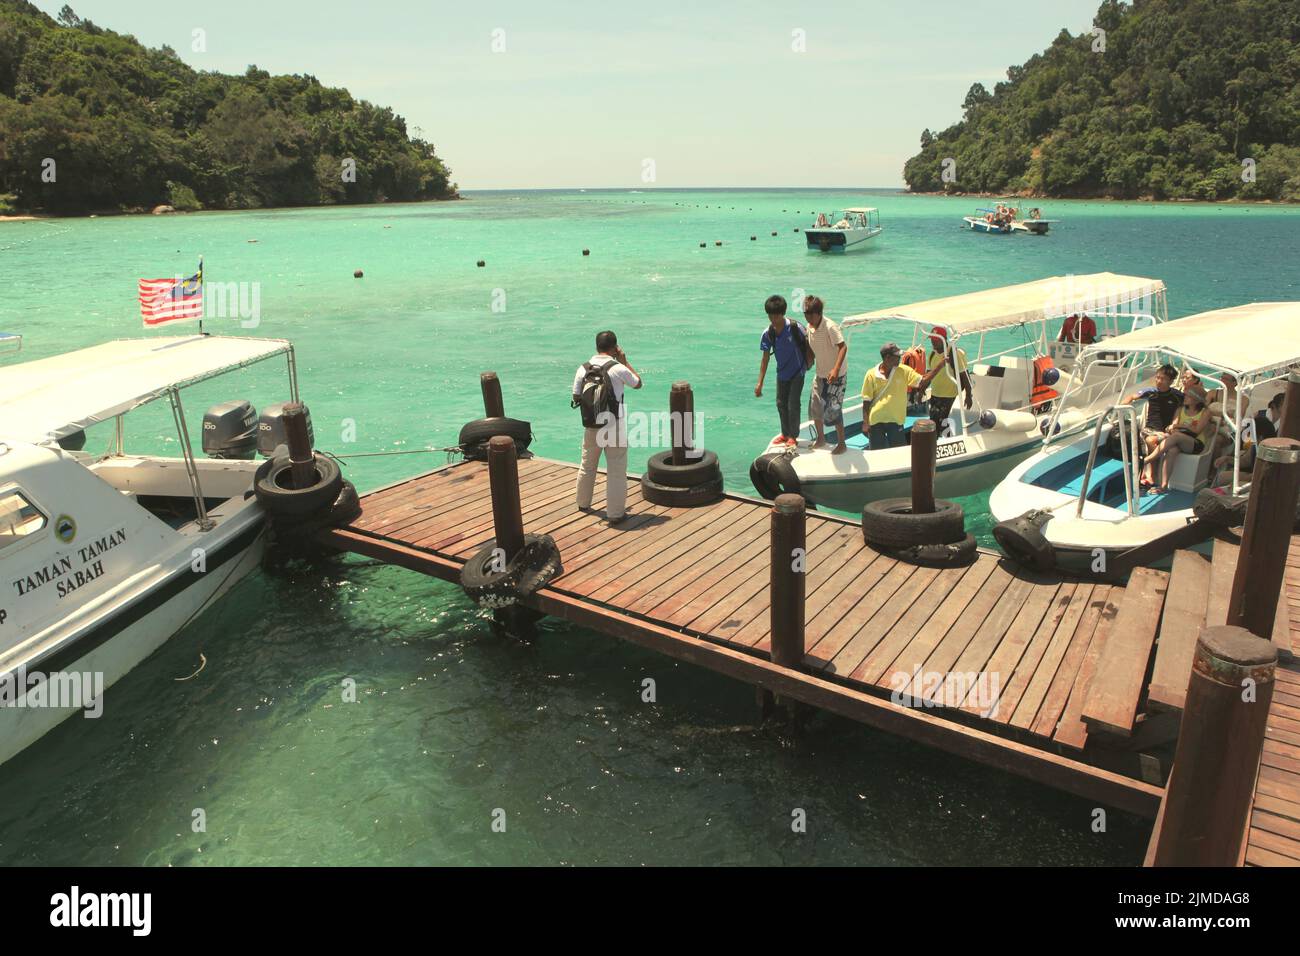 Visitors stepping out of boats as they are arriving at a jetty on Pulau Sapi (Sapi Island), a part of Tunku Abdul Rahman Park in Sabah, Malaysia. Stock Photo